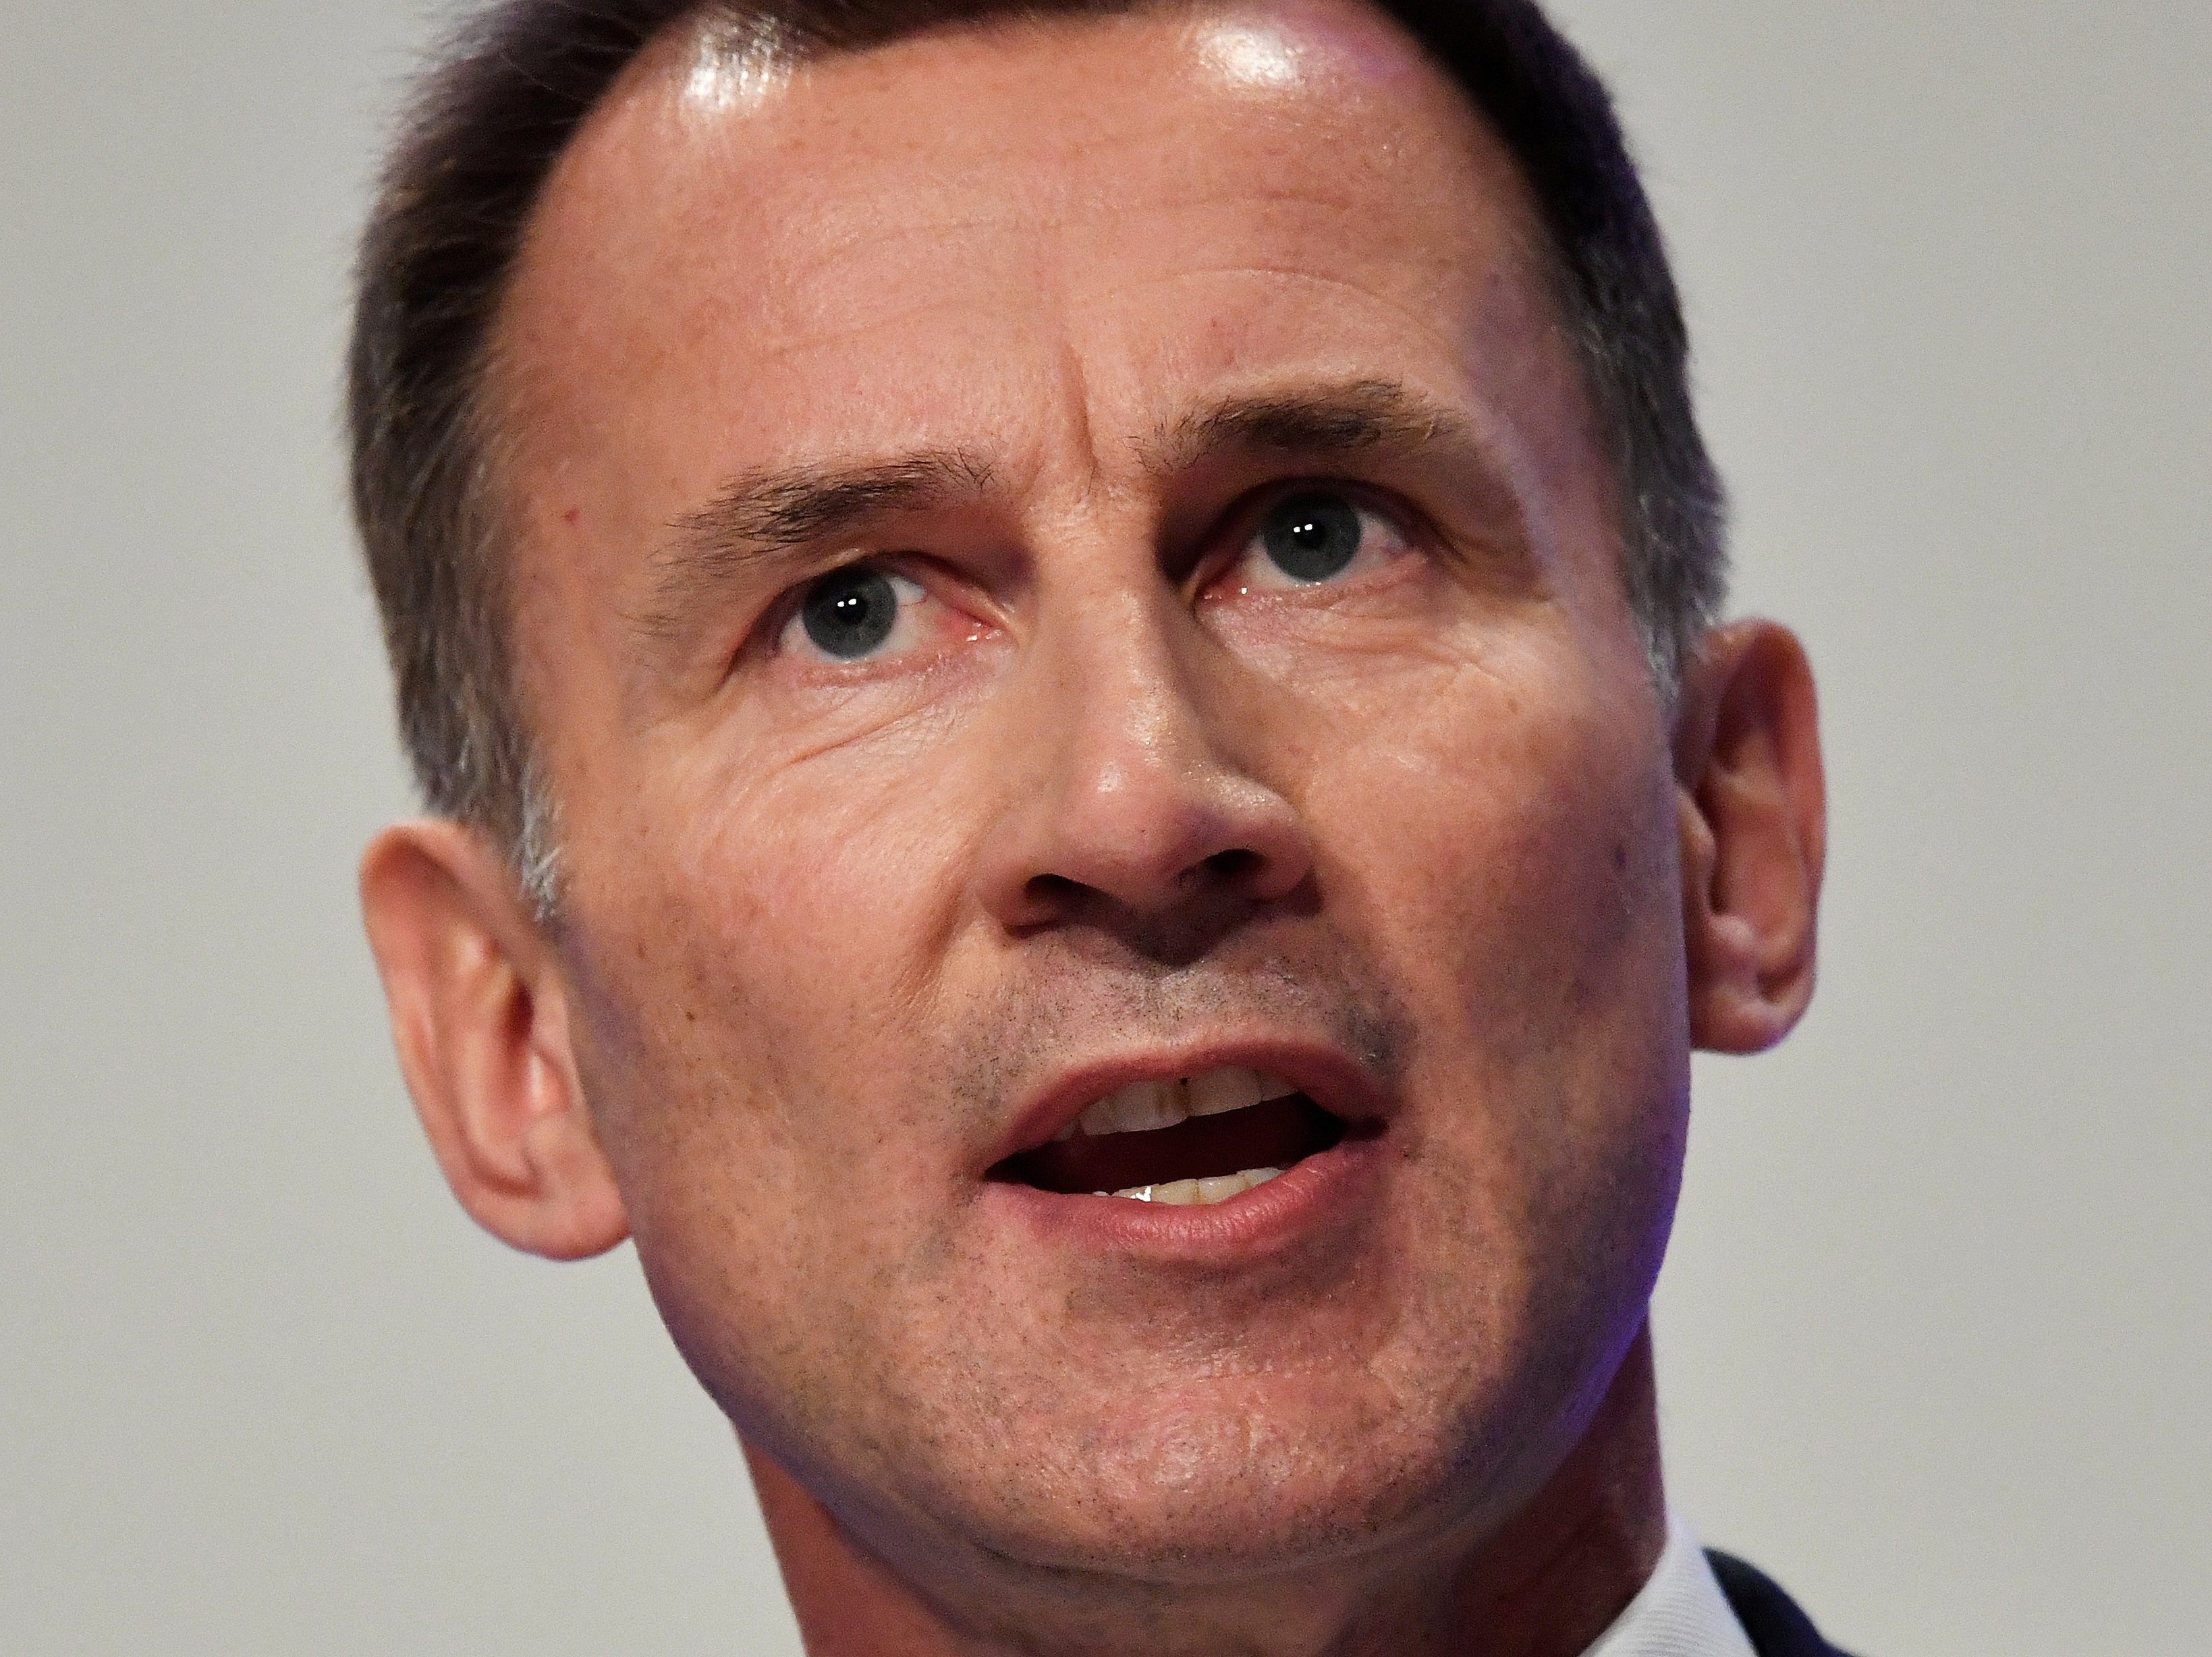 Jeremy Hunt voices UK concern to Saudi ambassador over disappearance of Washington Post journalist feared dead in Turkey